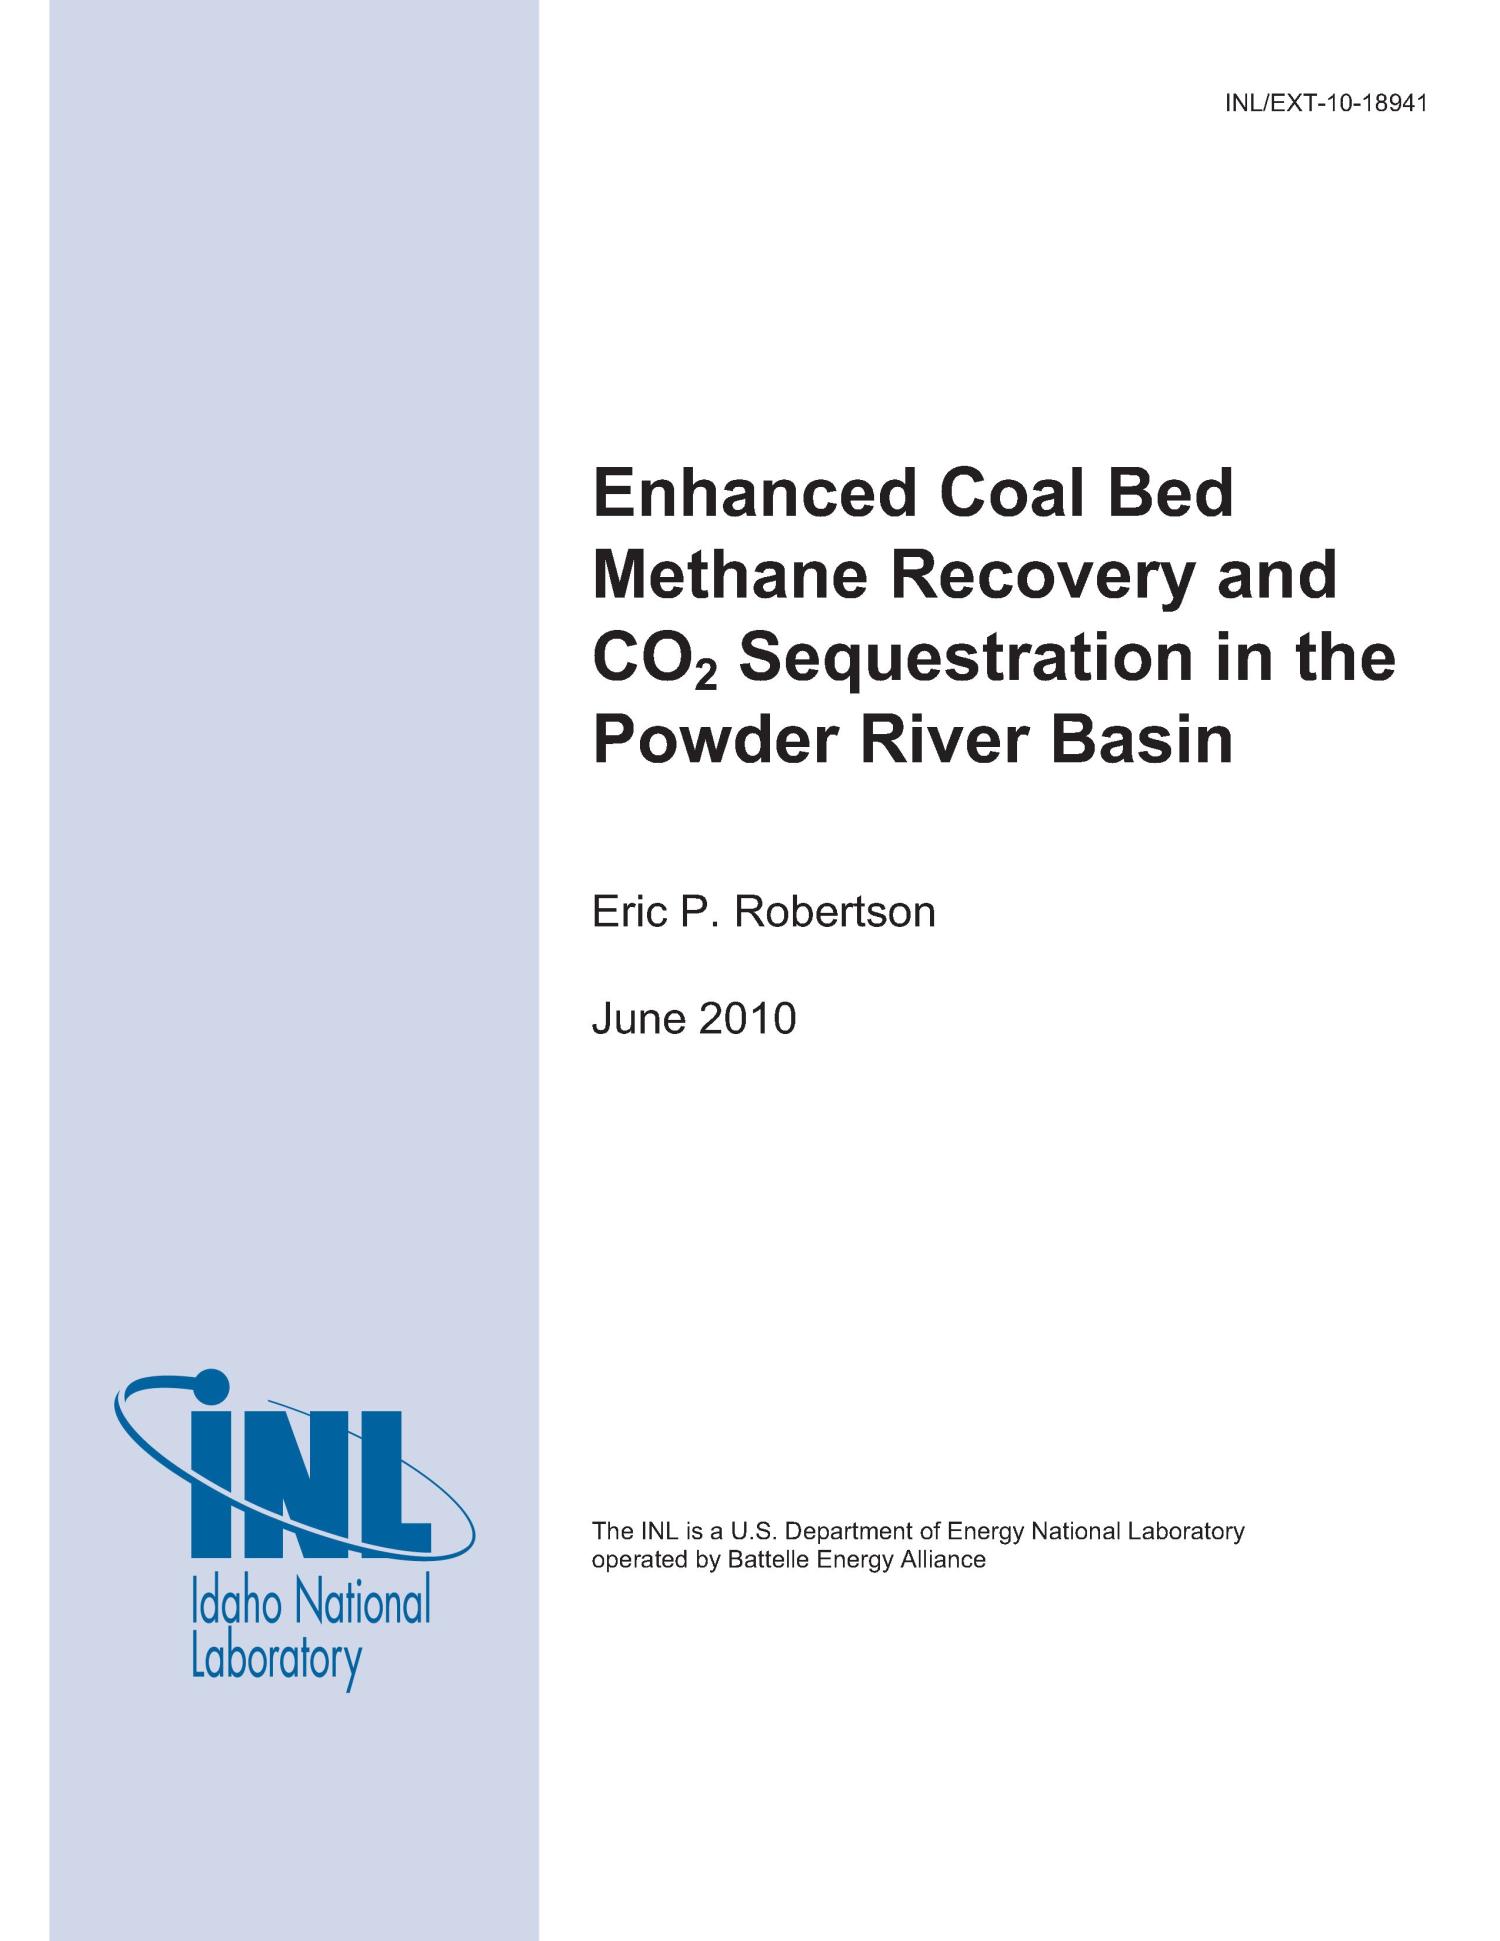 Enhanced Coal Bed Methane Recovery and CO2 Sequestration in the Powder River Basin
                                                
                                                    [Sequence #]: 1 of 35
                                                